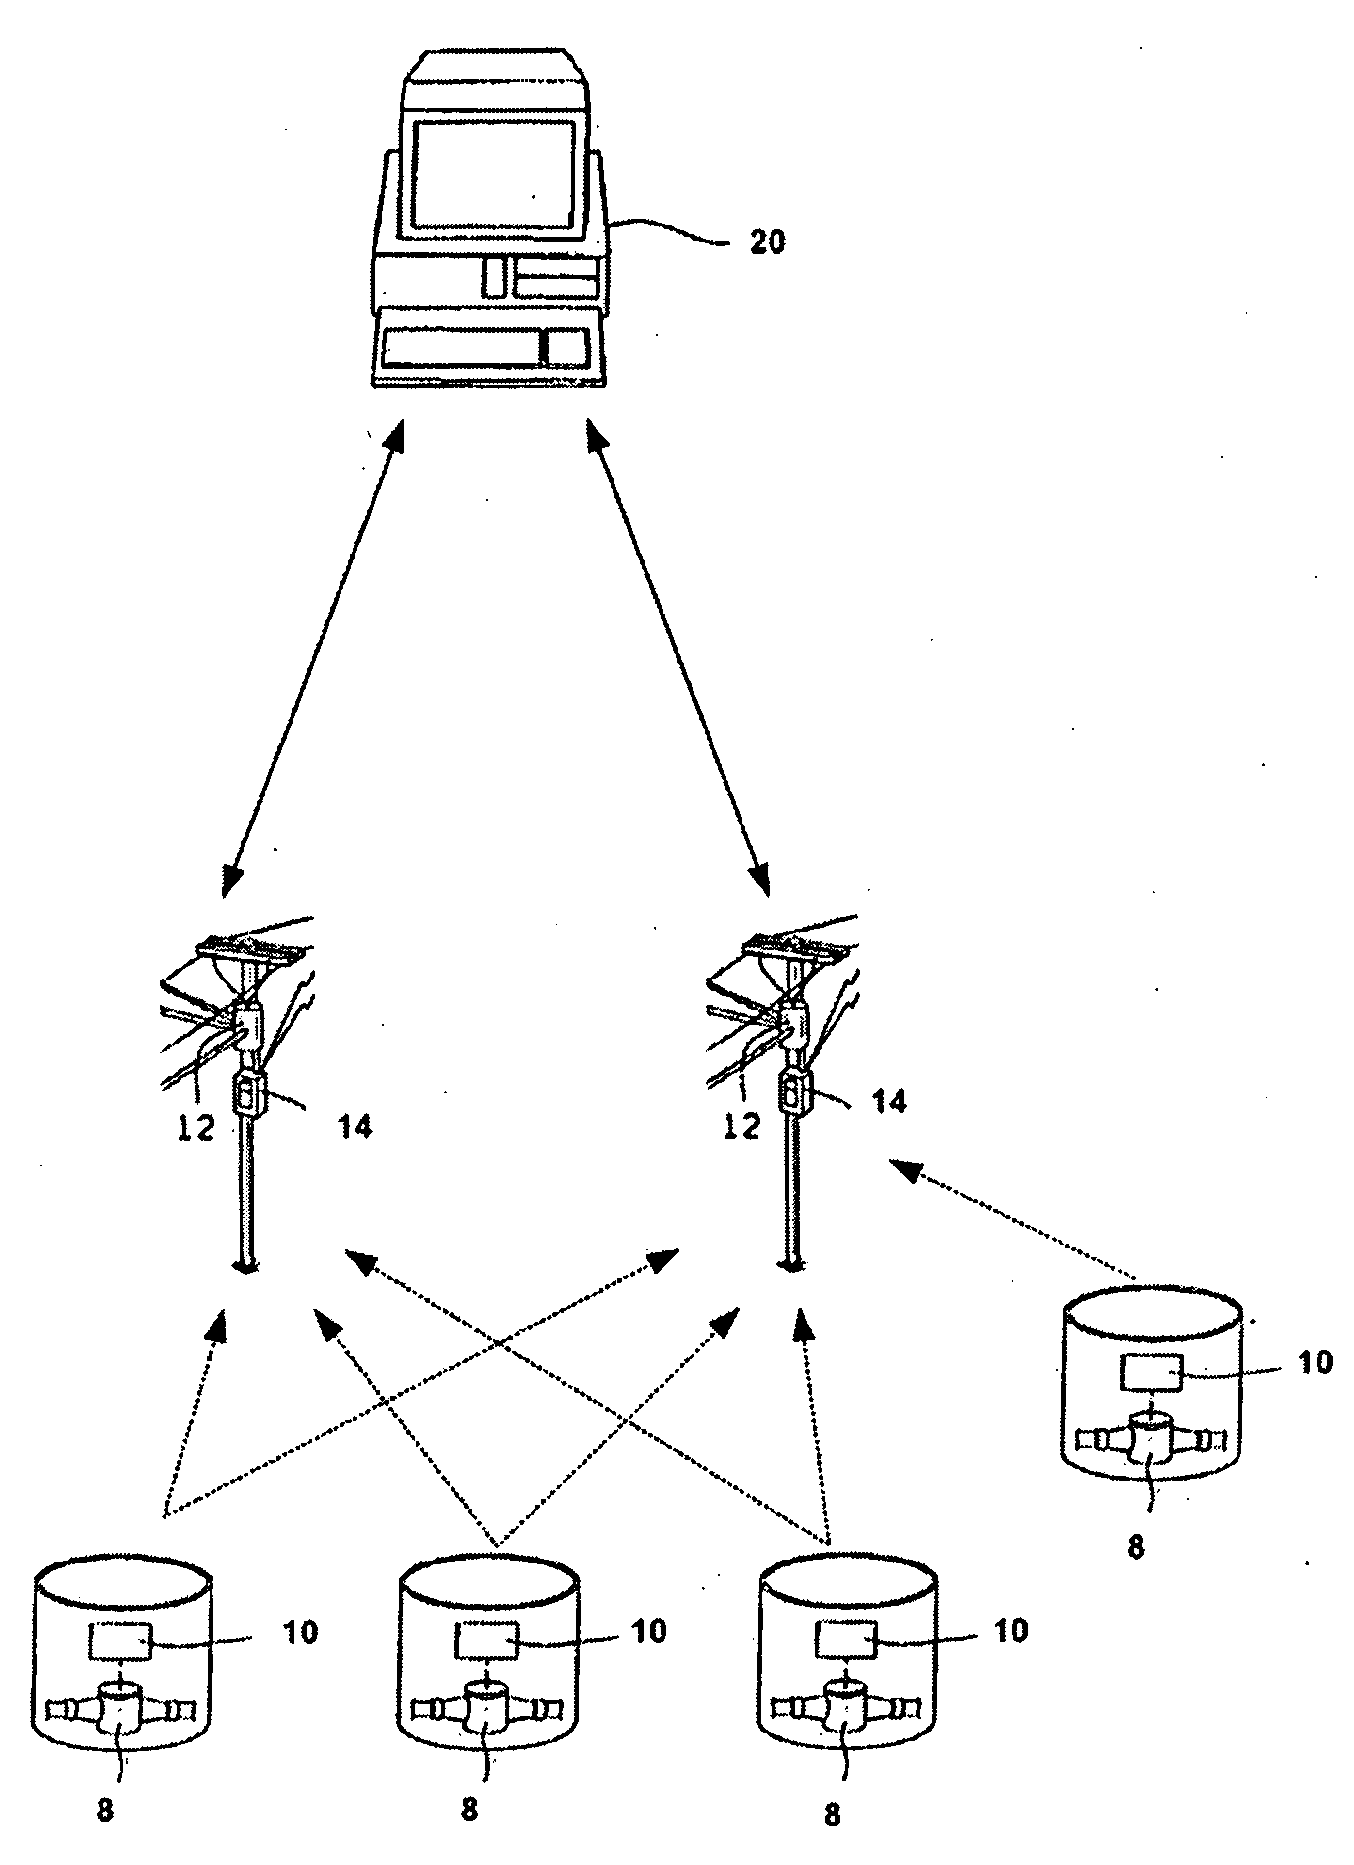 Fixed network for an automatic utility meter reading system